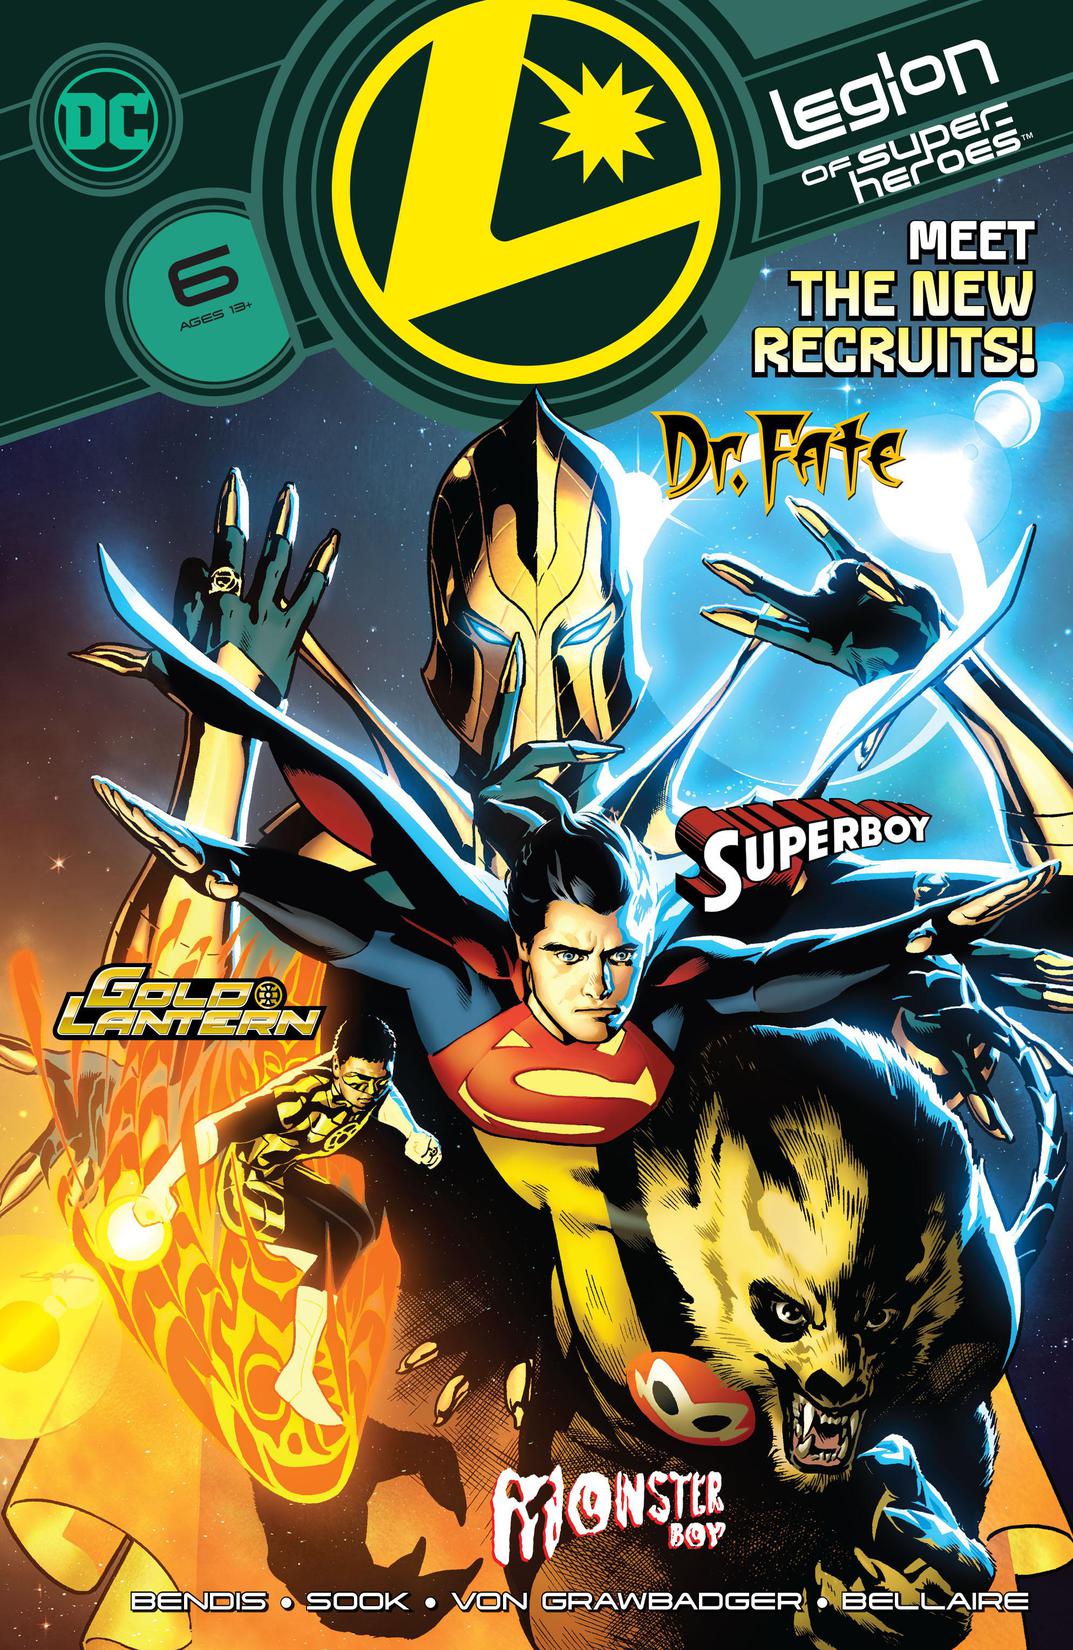 Legion of Super-Heroes (2019-) #6 preview images